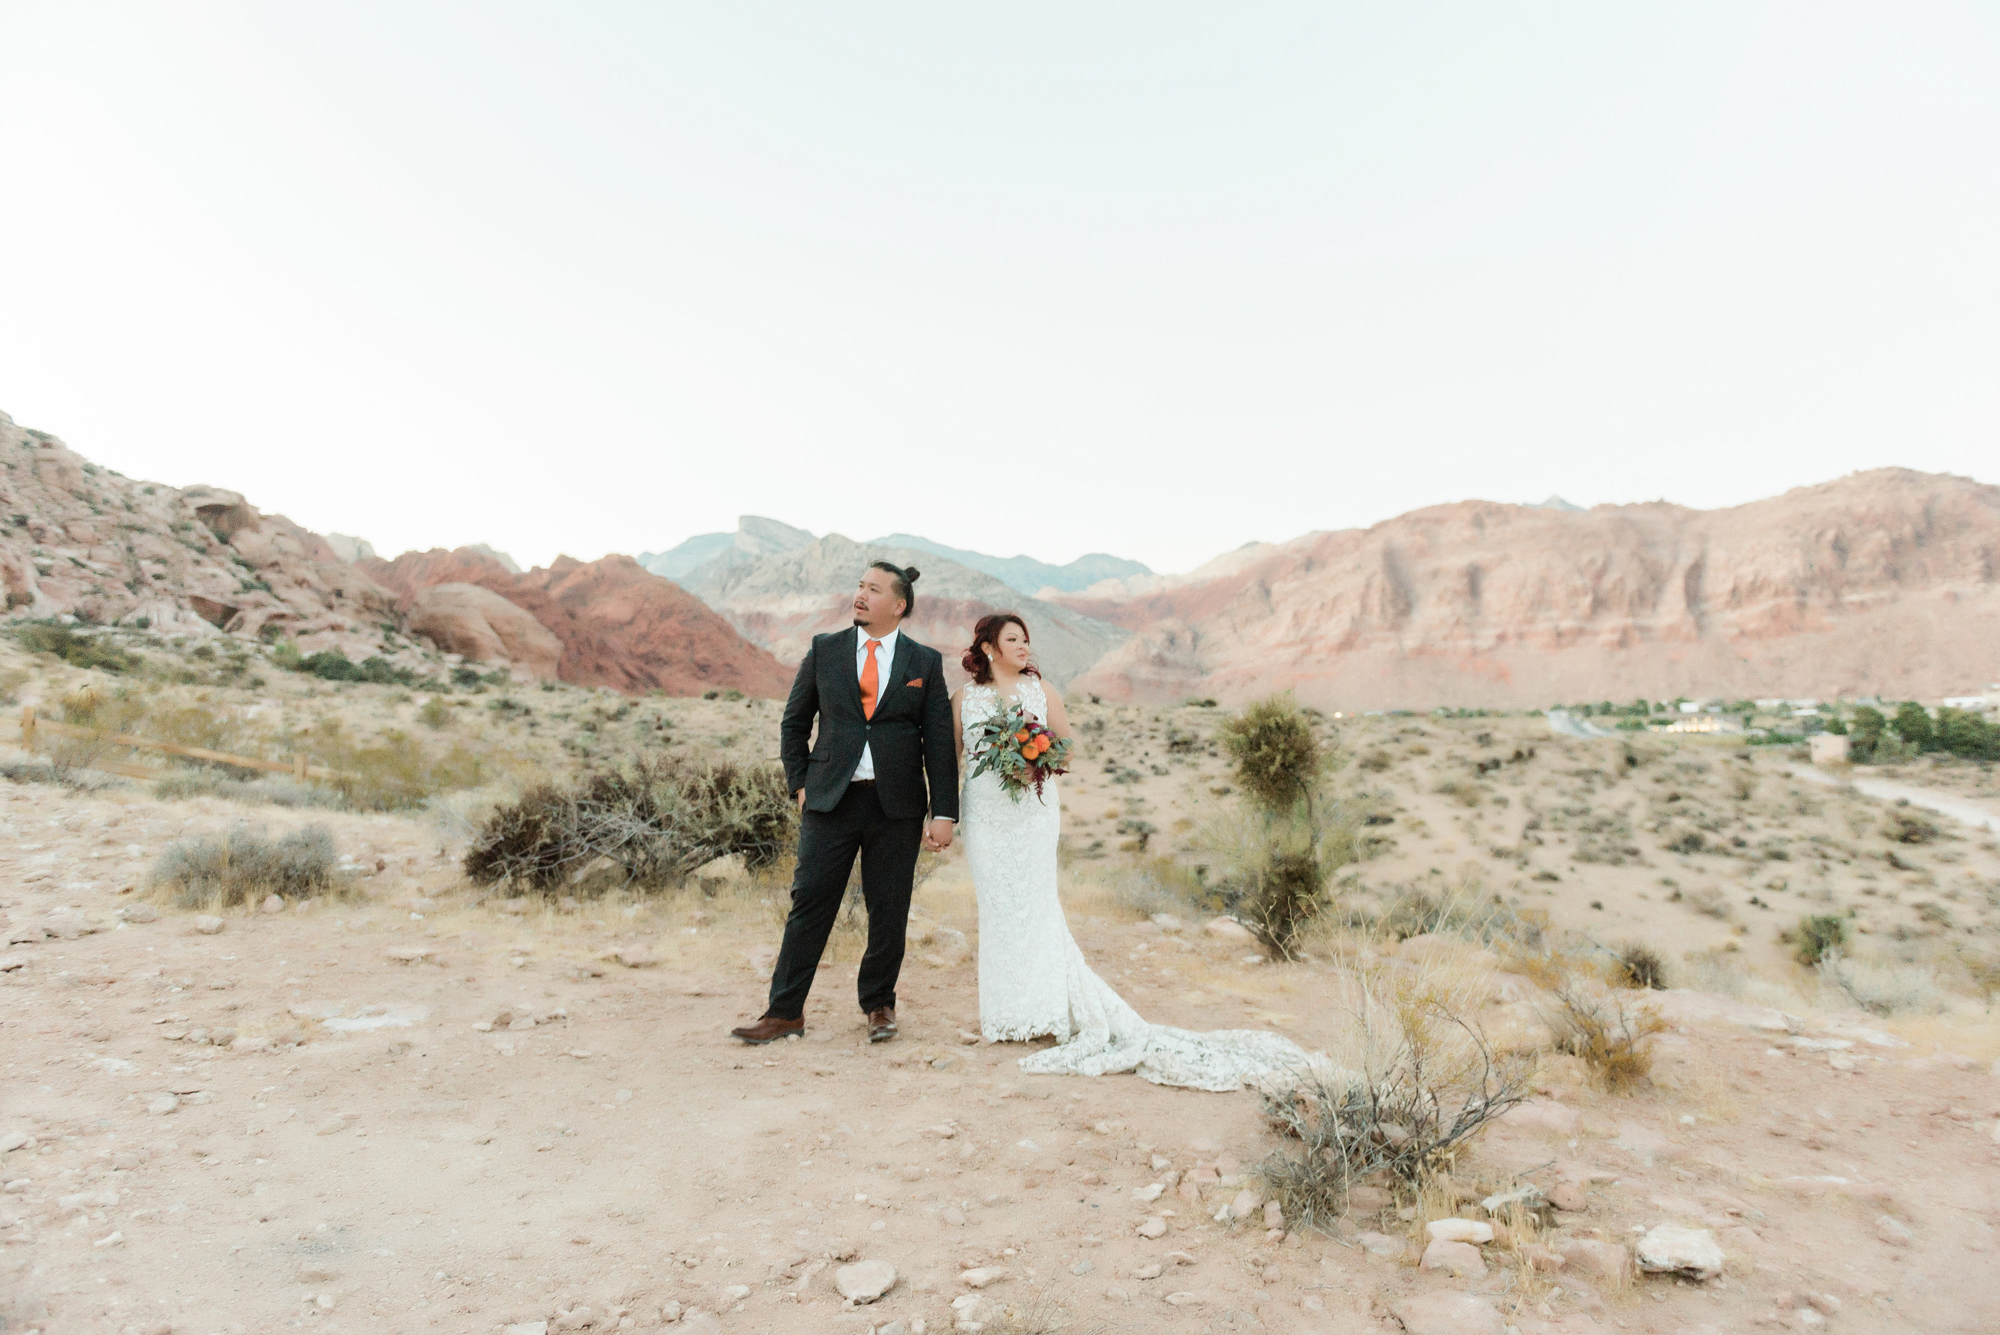 Christine + Zack: A Real Wedding in Red Spring